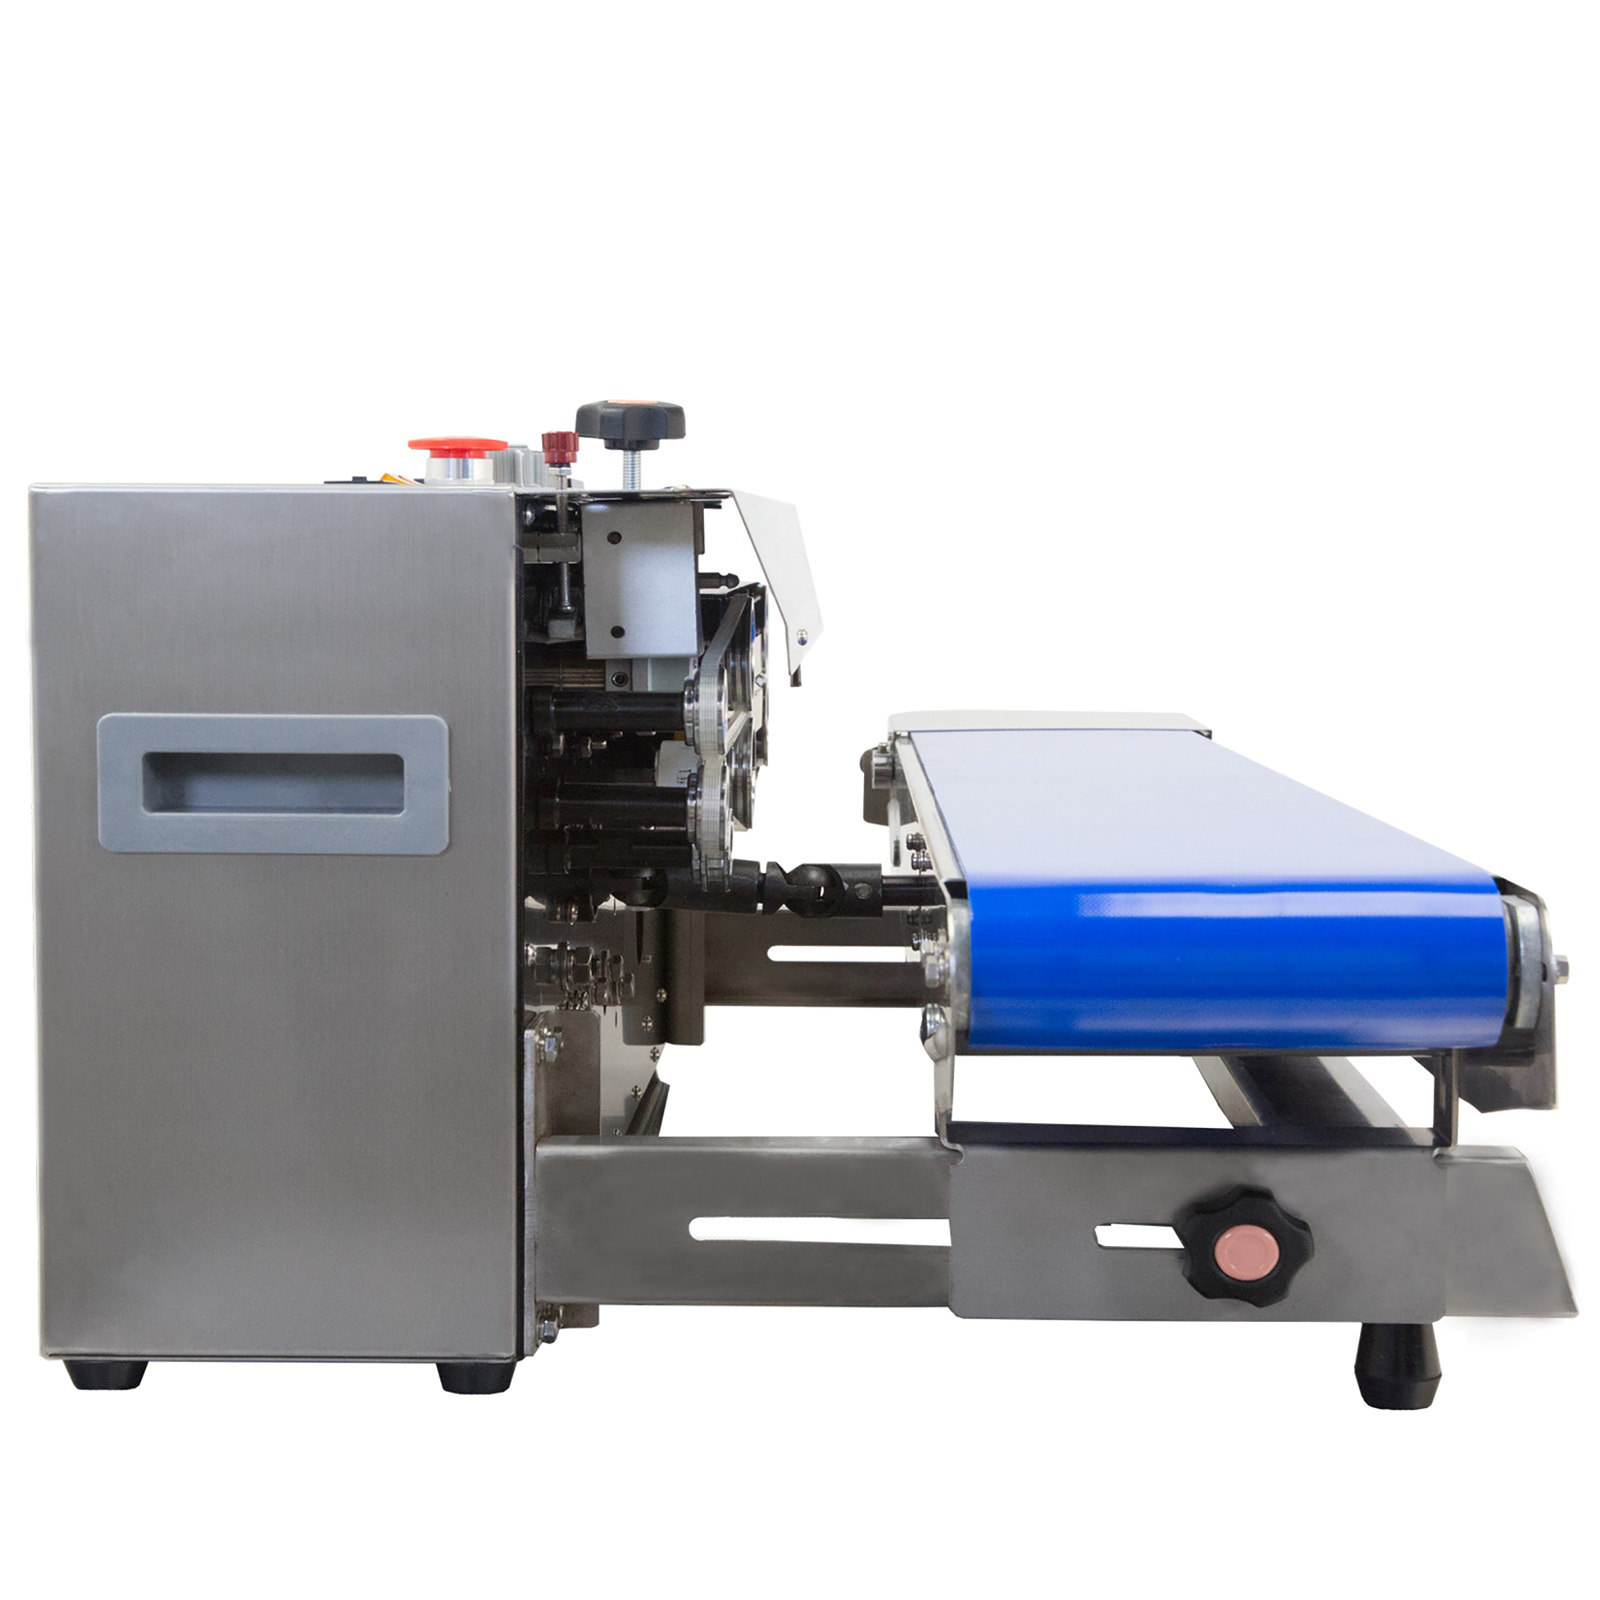 Stainless steel horizontal continuous band sealer by JORES TECHNOLOGIES®